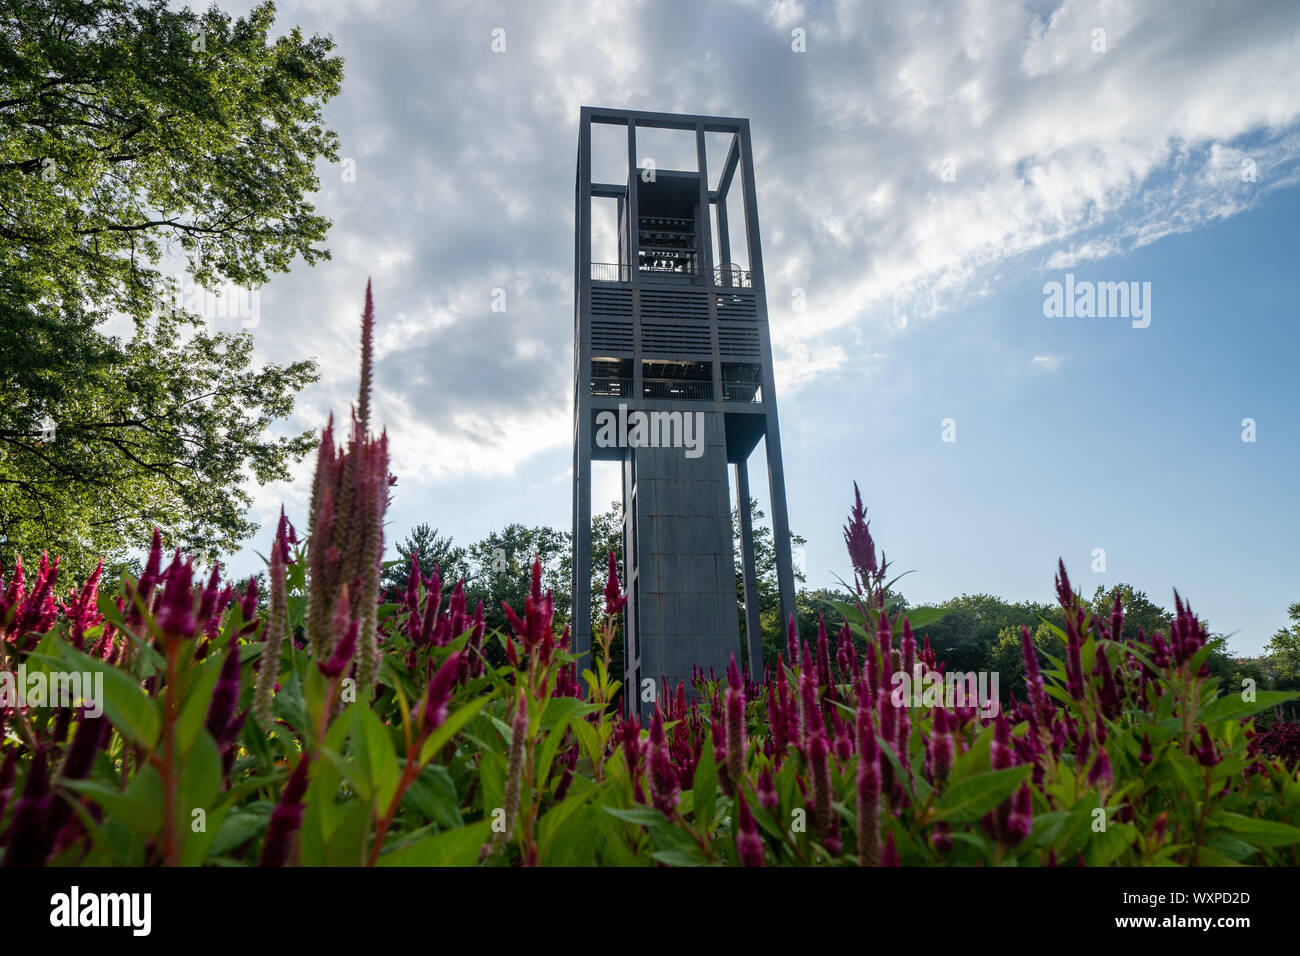 Washington, DC - August 7, 2019: Netherlands Carillon, a 127-foot tall steel tower in Arlington Ridge Park, with flowers in foreground Stock Photo